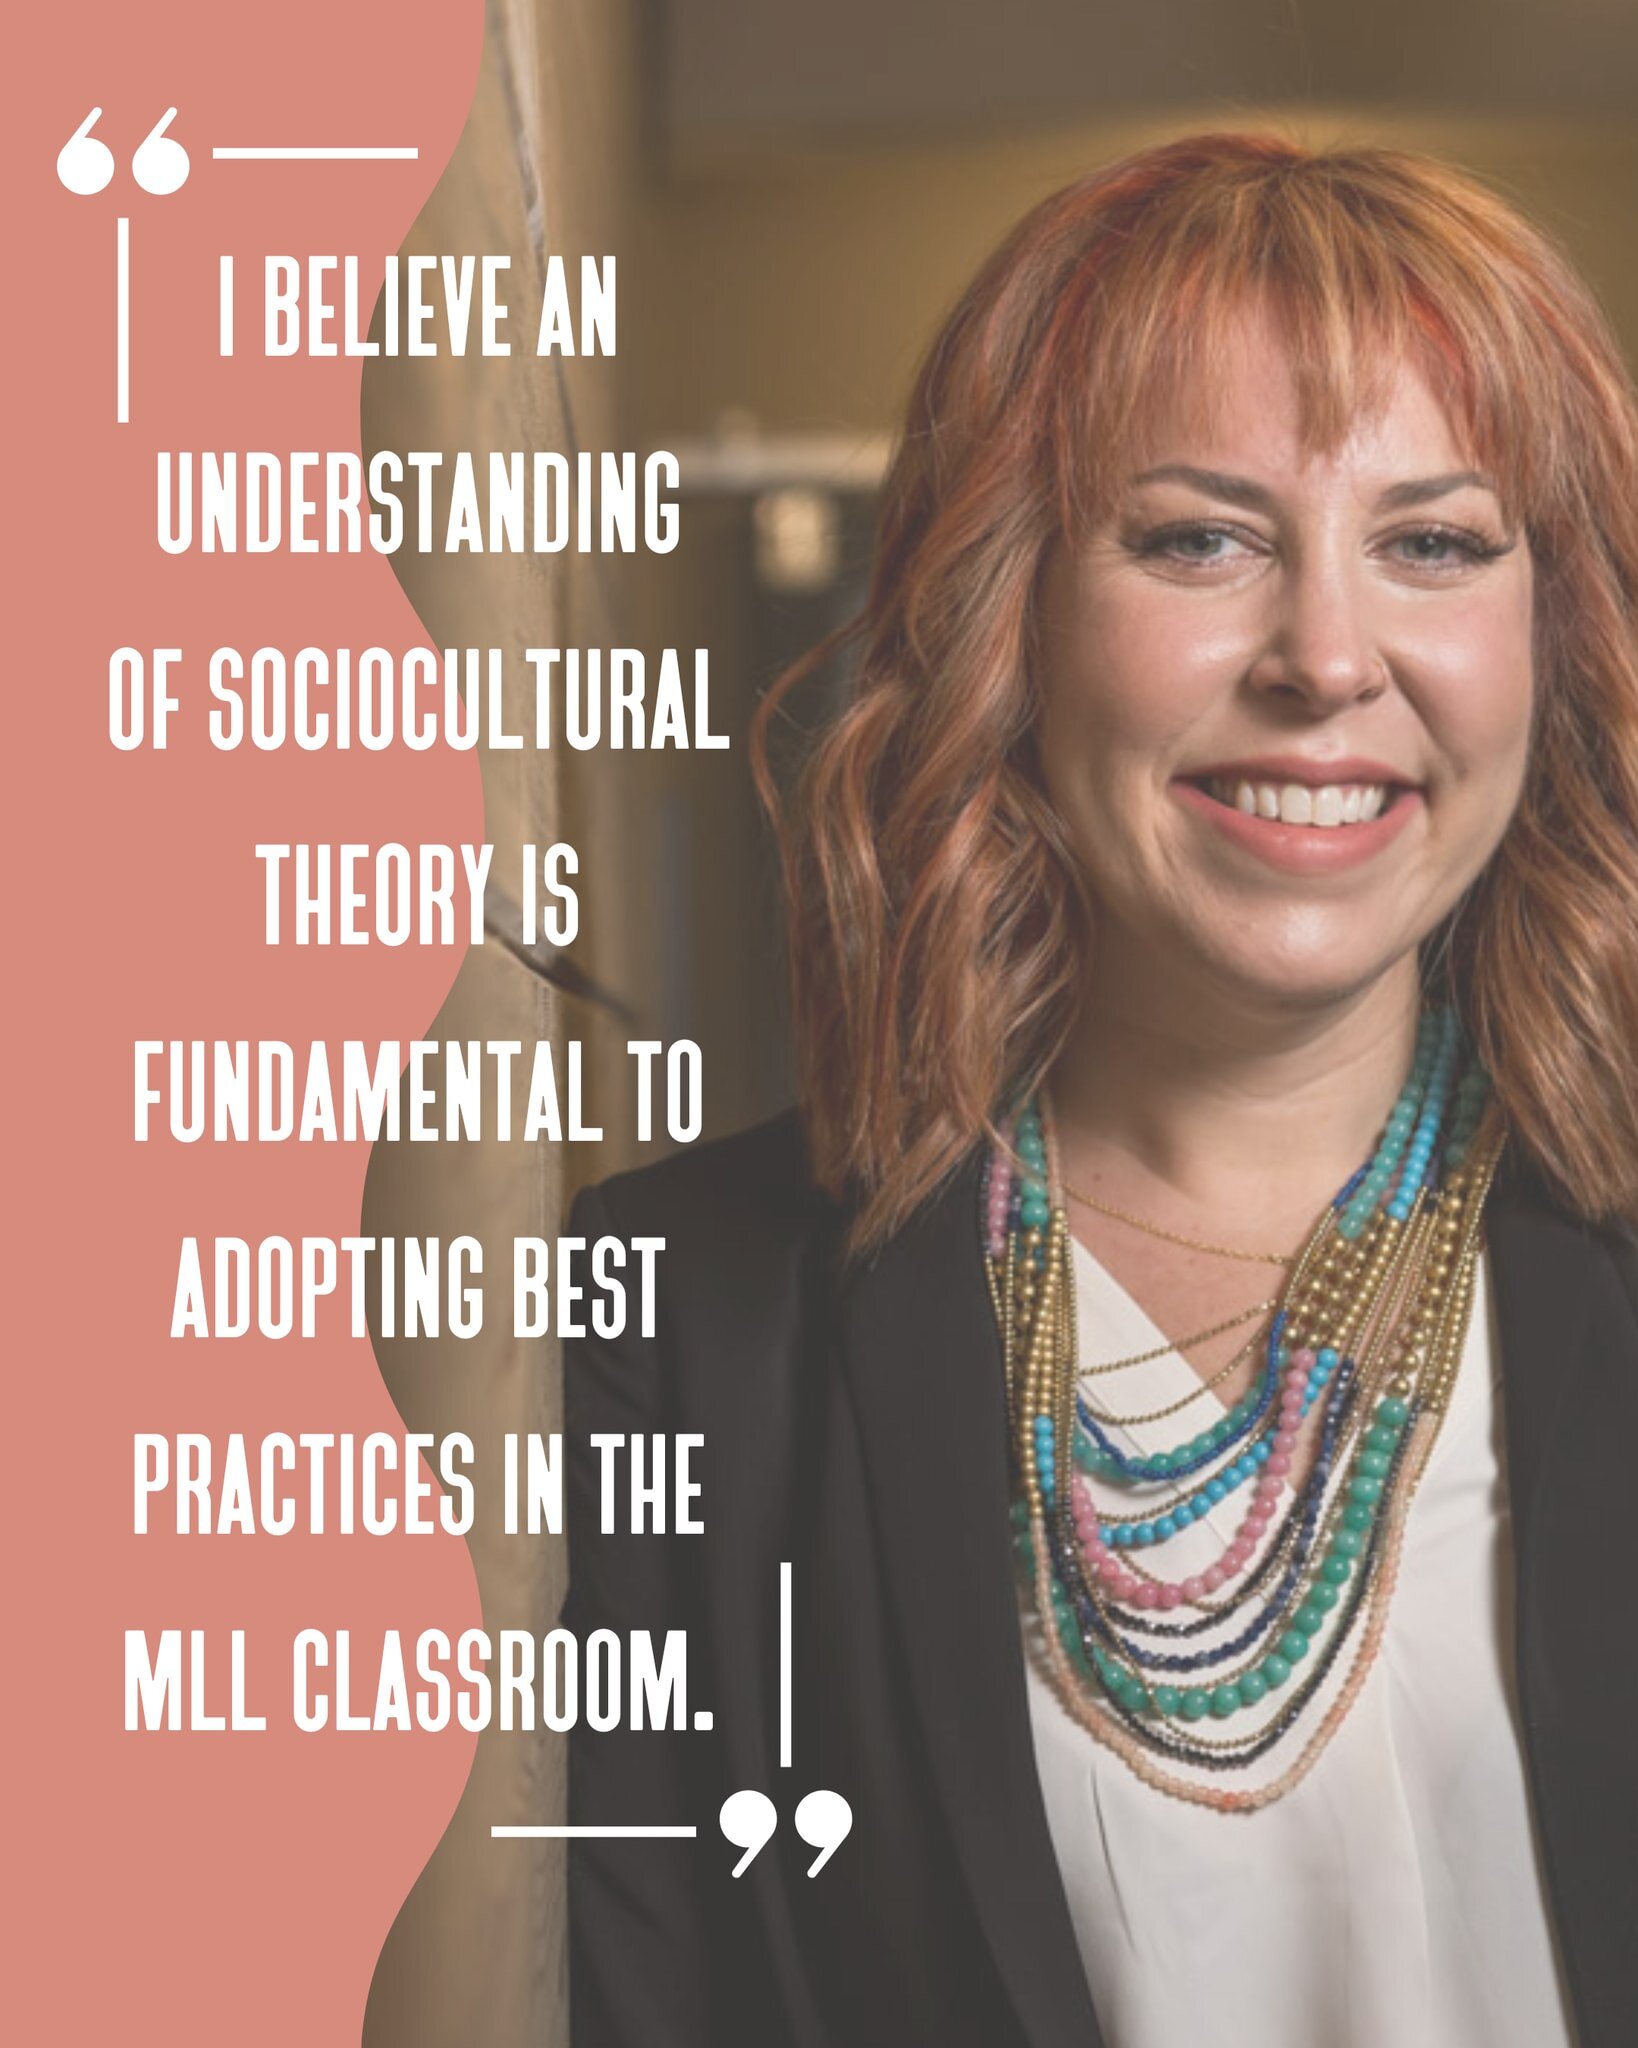 Today, I wanted to share a little bit about my teaching philosophy. As many of you know, I firmly believe that an understanding of sociocultural theory (SCT) is absolutely essential for anyone teaching in a multilingual and multicultural classroom.

